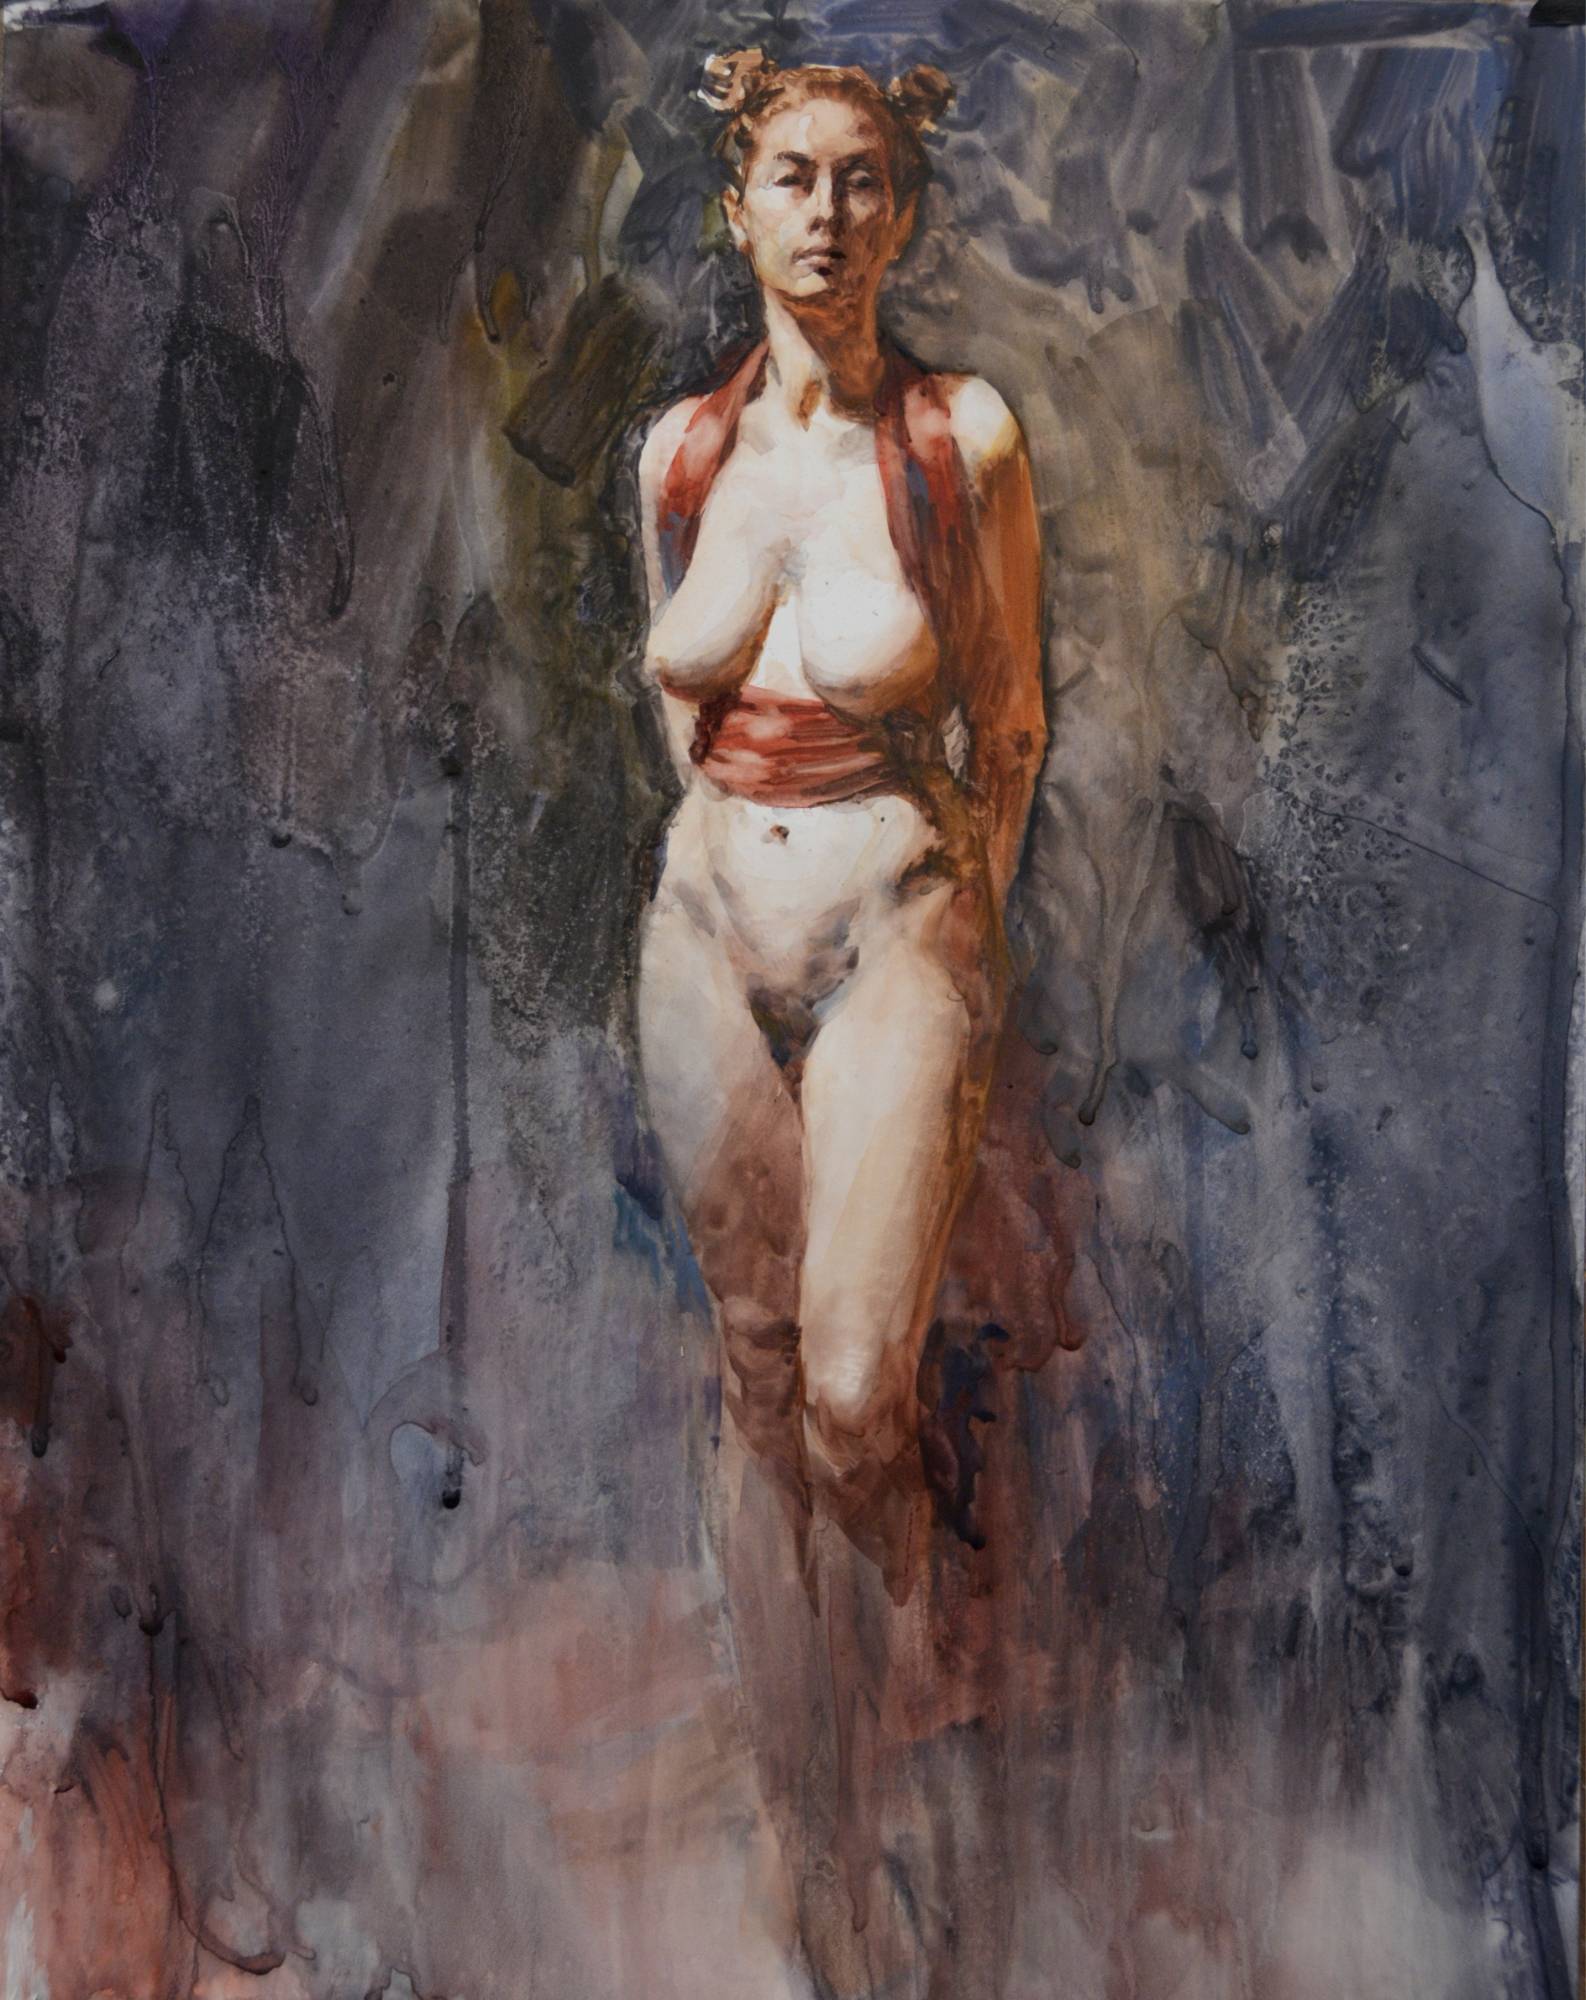 watercolor painting of a standing figure wearing a red fabric harness arrangement gazing at viewer